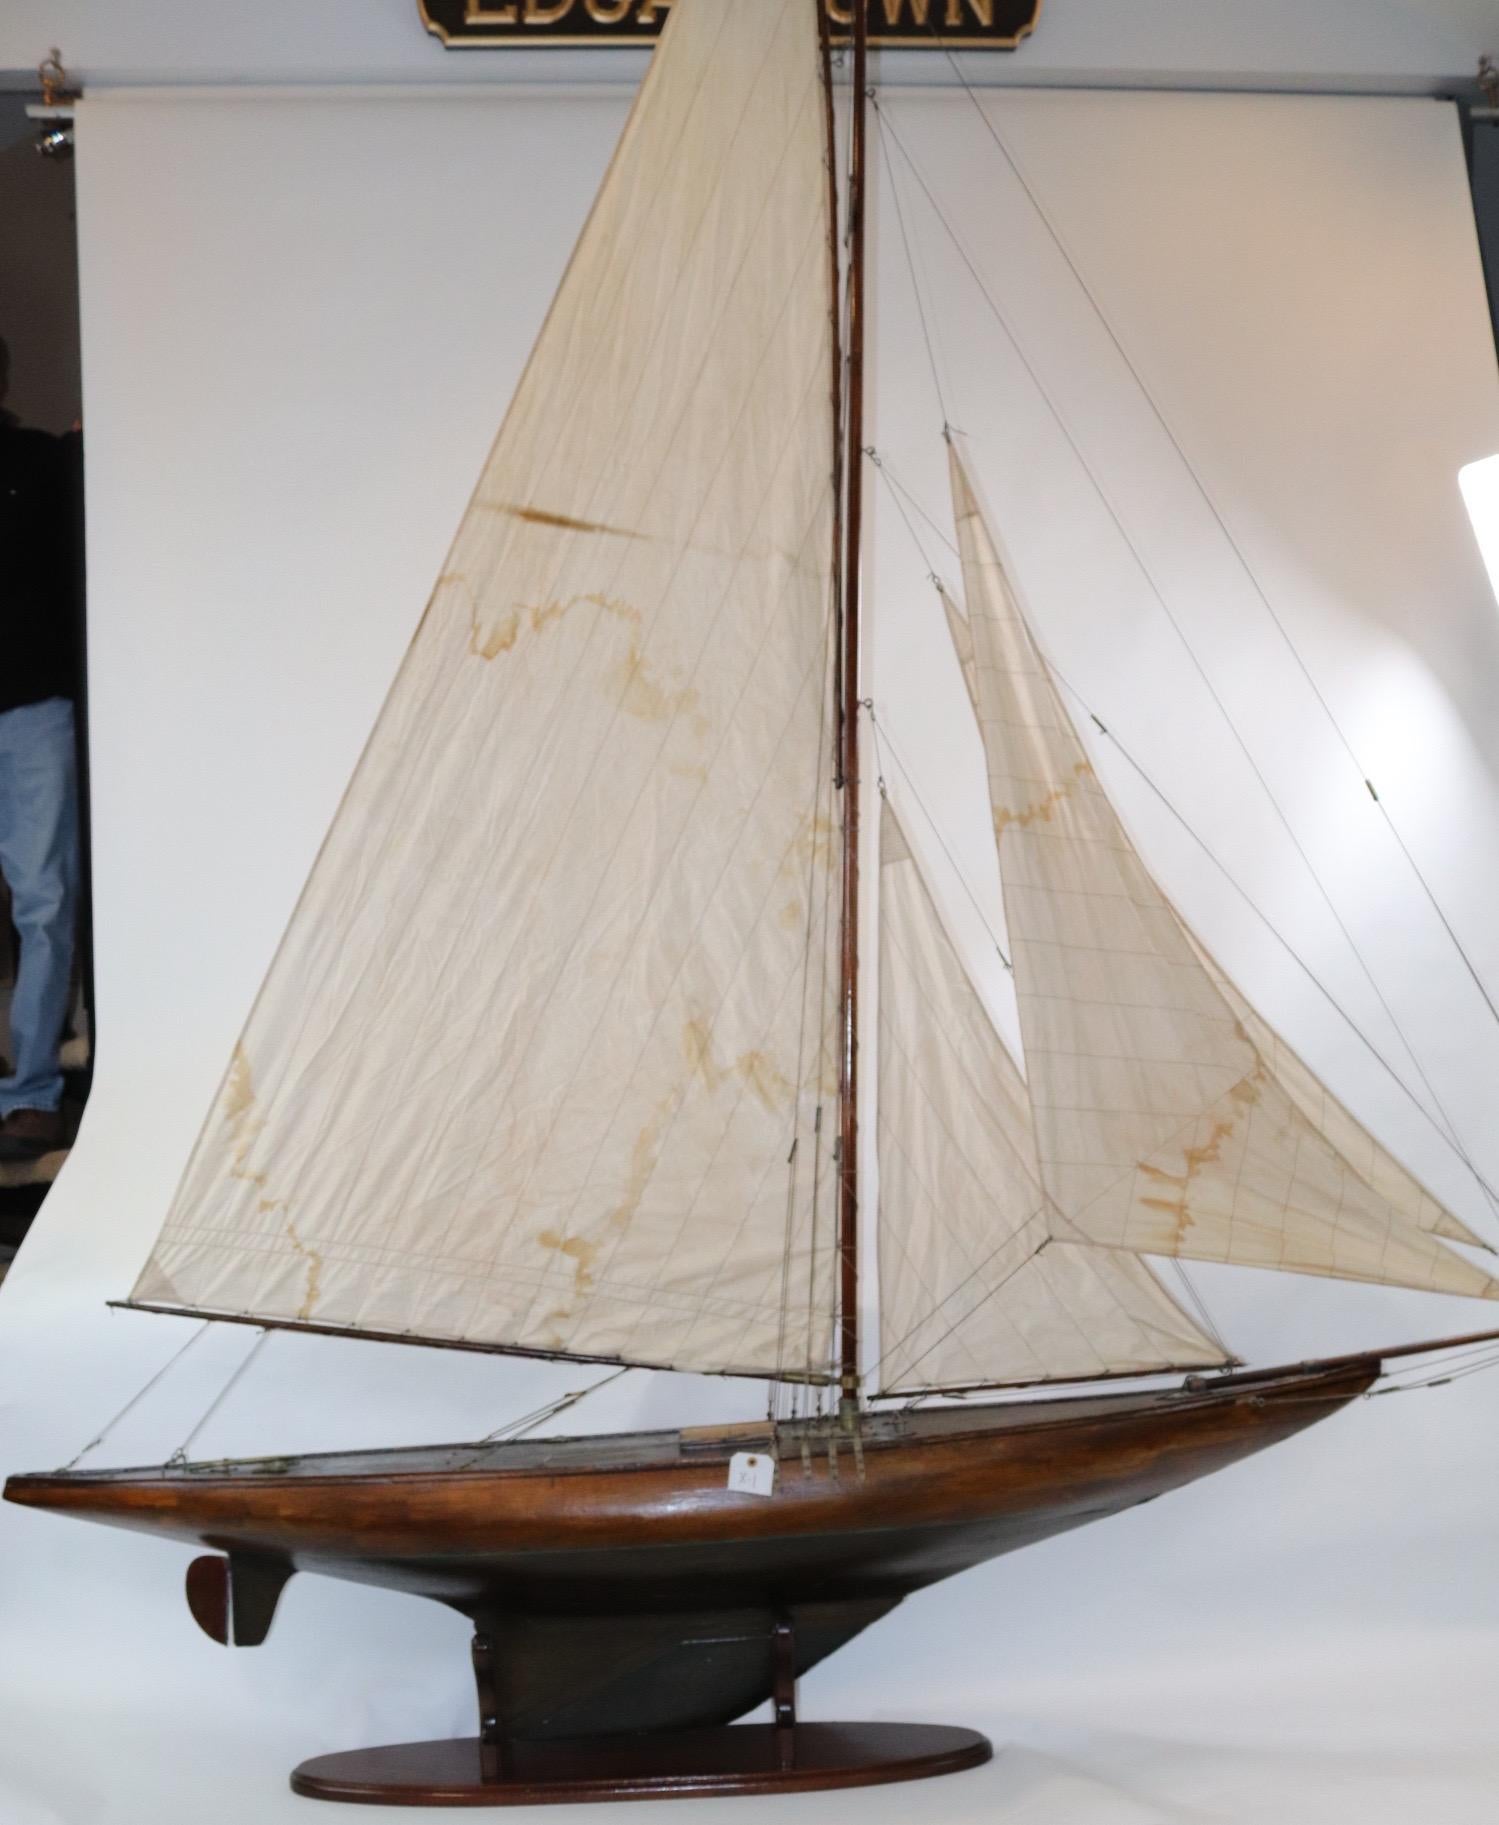 Vintage K class pond yacht with sleek hull, heavy lead keel, brass fittings and a full suit of linen sails. Model weighs 69 pounds. (X-1)